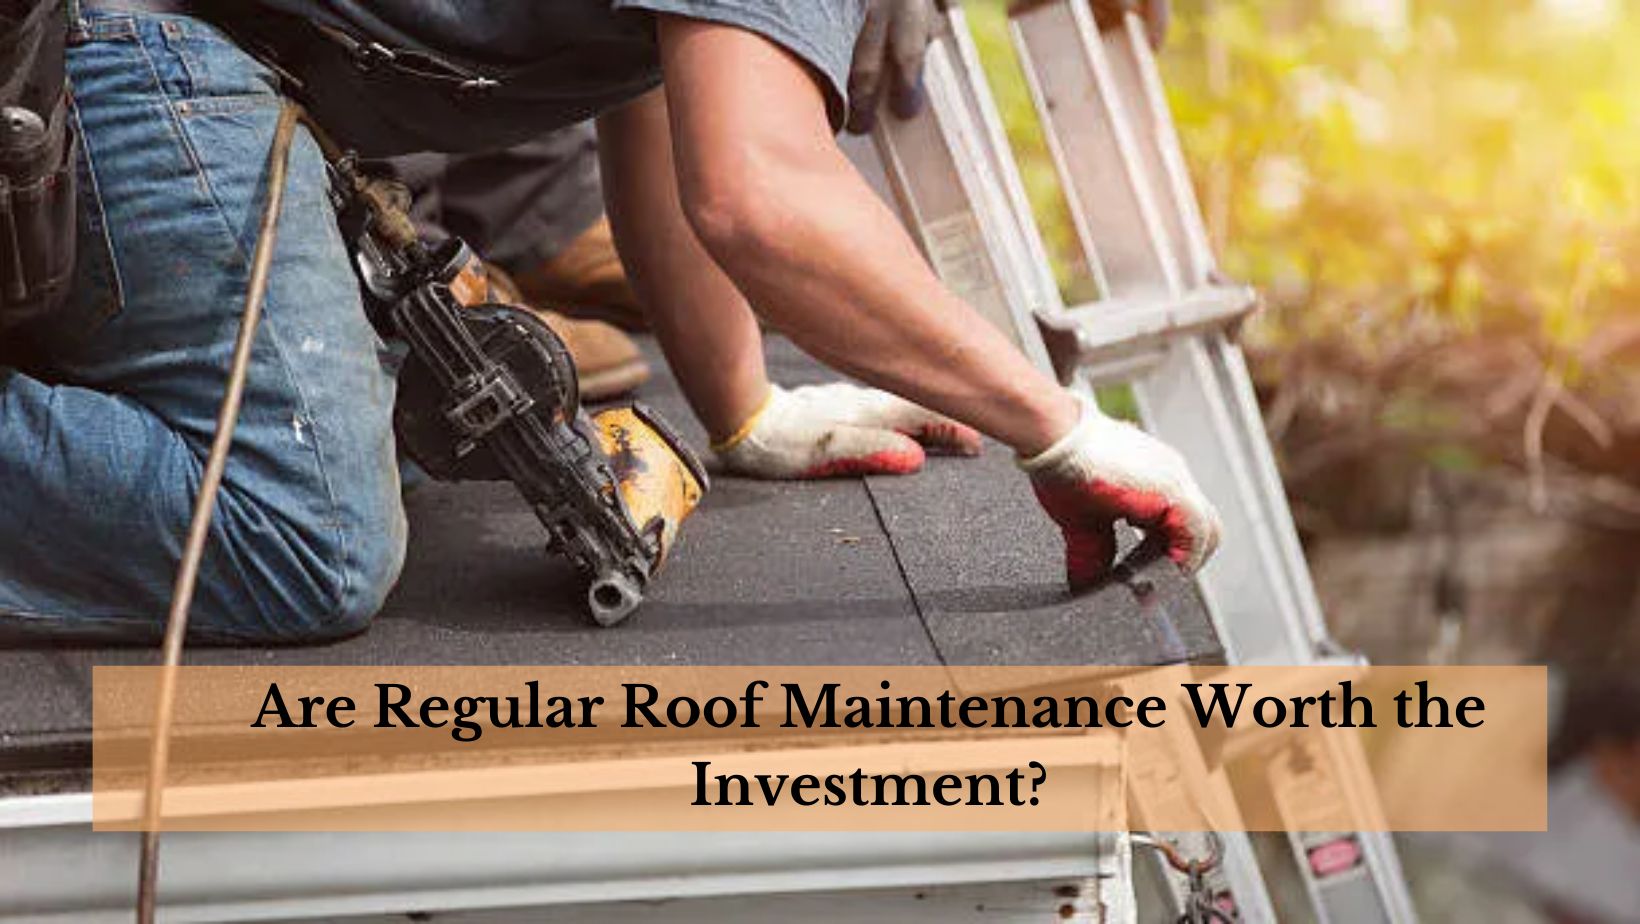 Are Regular Roof Maintenance Worth the Investment?